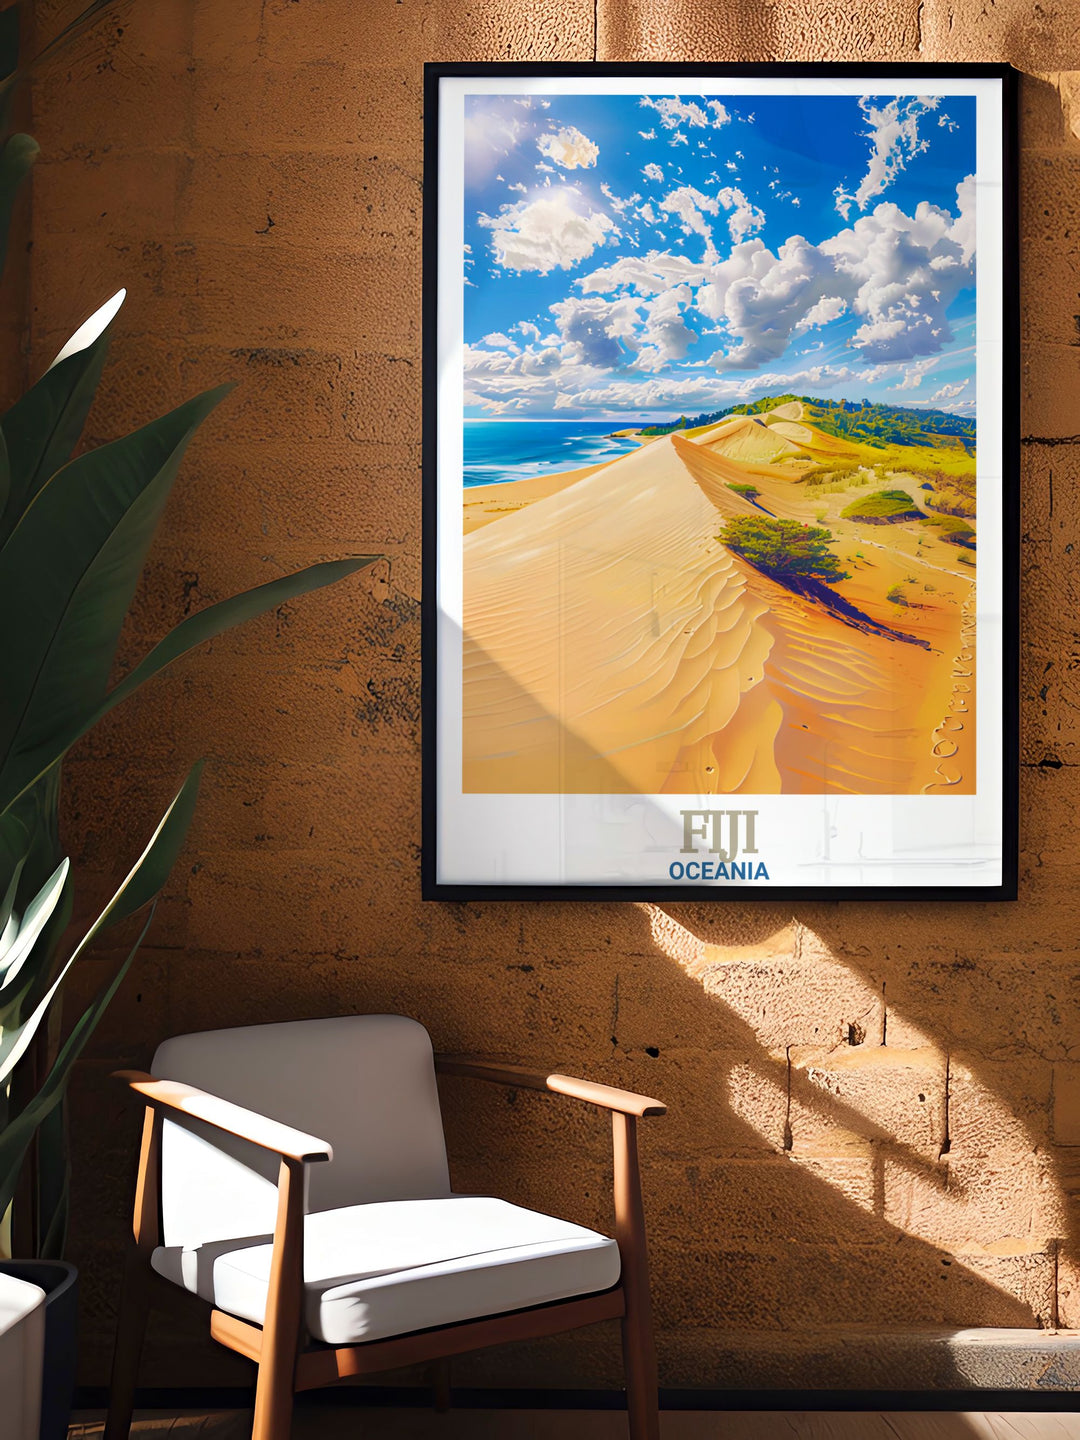 Sigatoka Sand Dunes National Park vintage print offering a nostalgic look at one of Fijis most treasured natural sites. This Sigatoka Sand Dunes National Park wall art combines classic charm with contemporary style perfect for any decor.